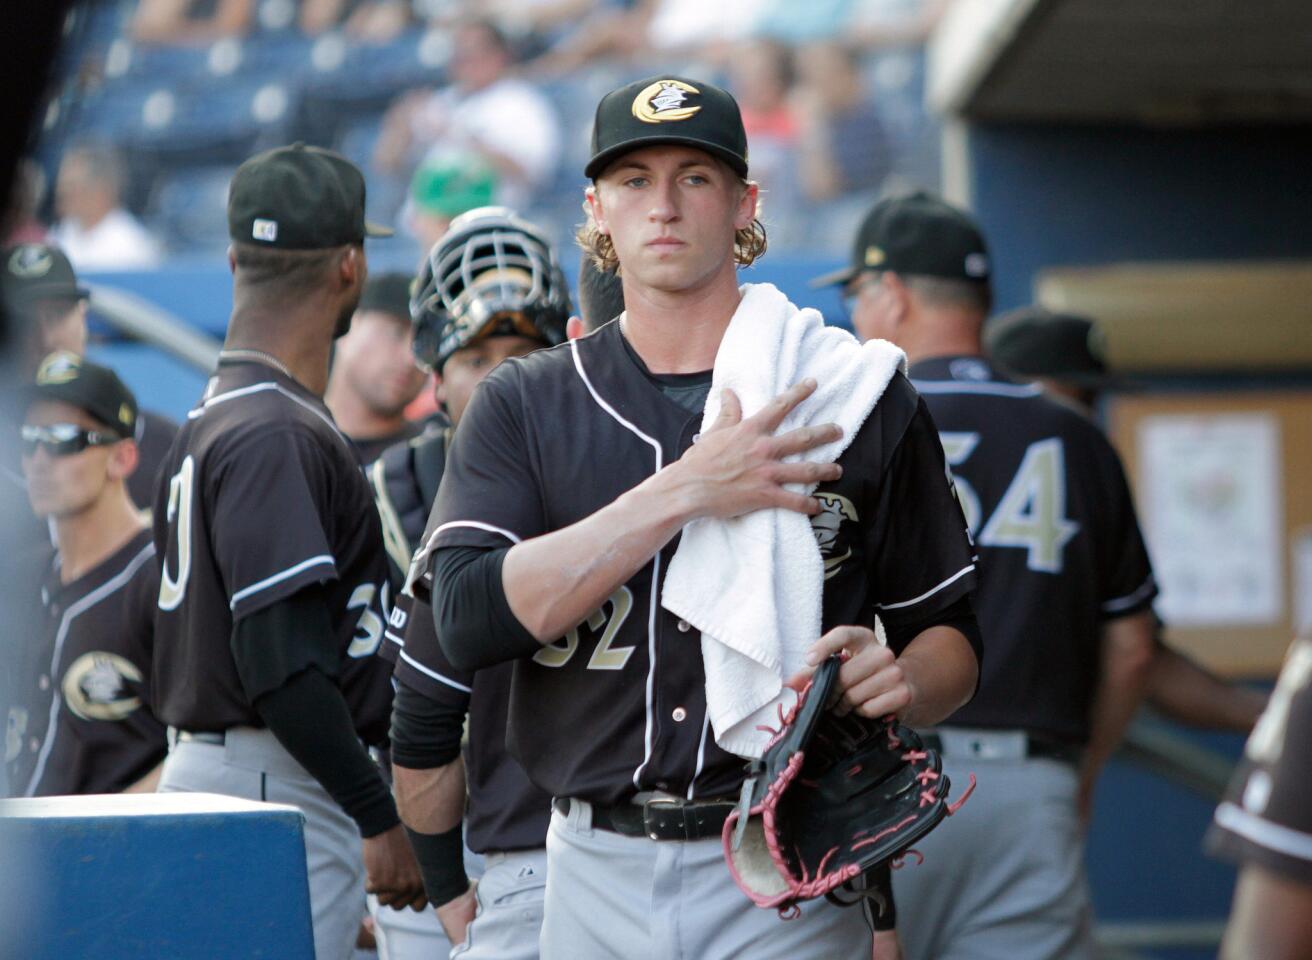 Michael Kopech, a pitcher for the Charlotte Knights, in the dugout before he plays against the Norfolk Tides at Harbor Park in Norfolk, Va., on Aug. 21, 2017.